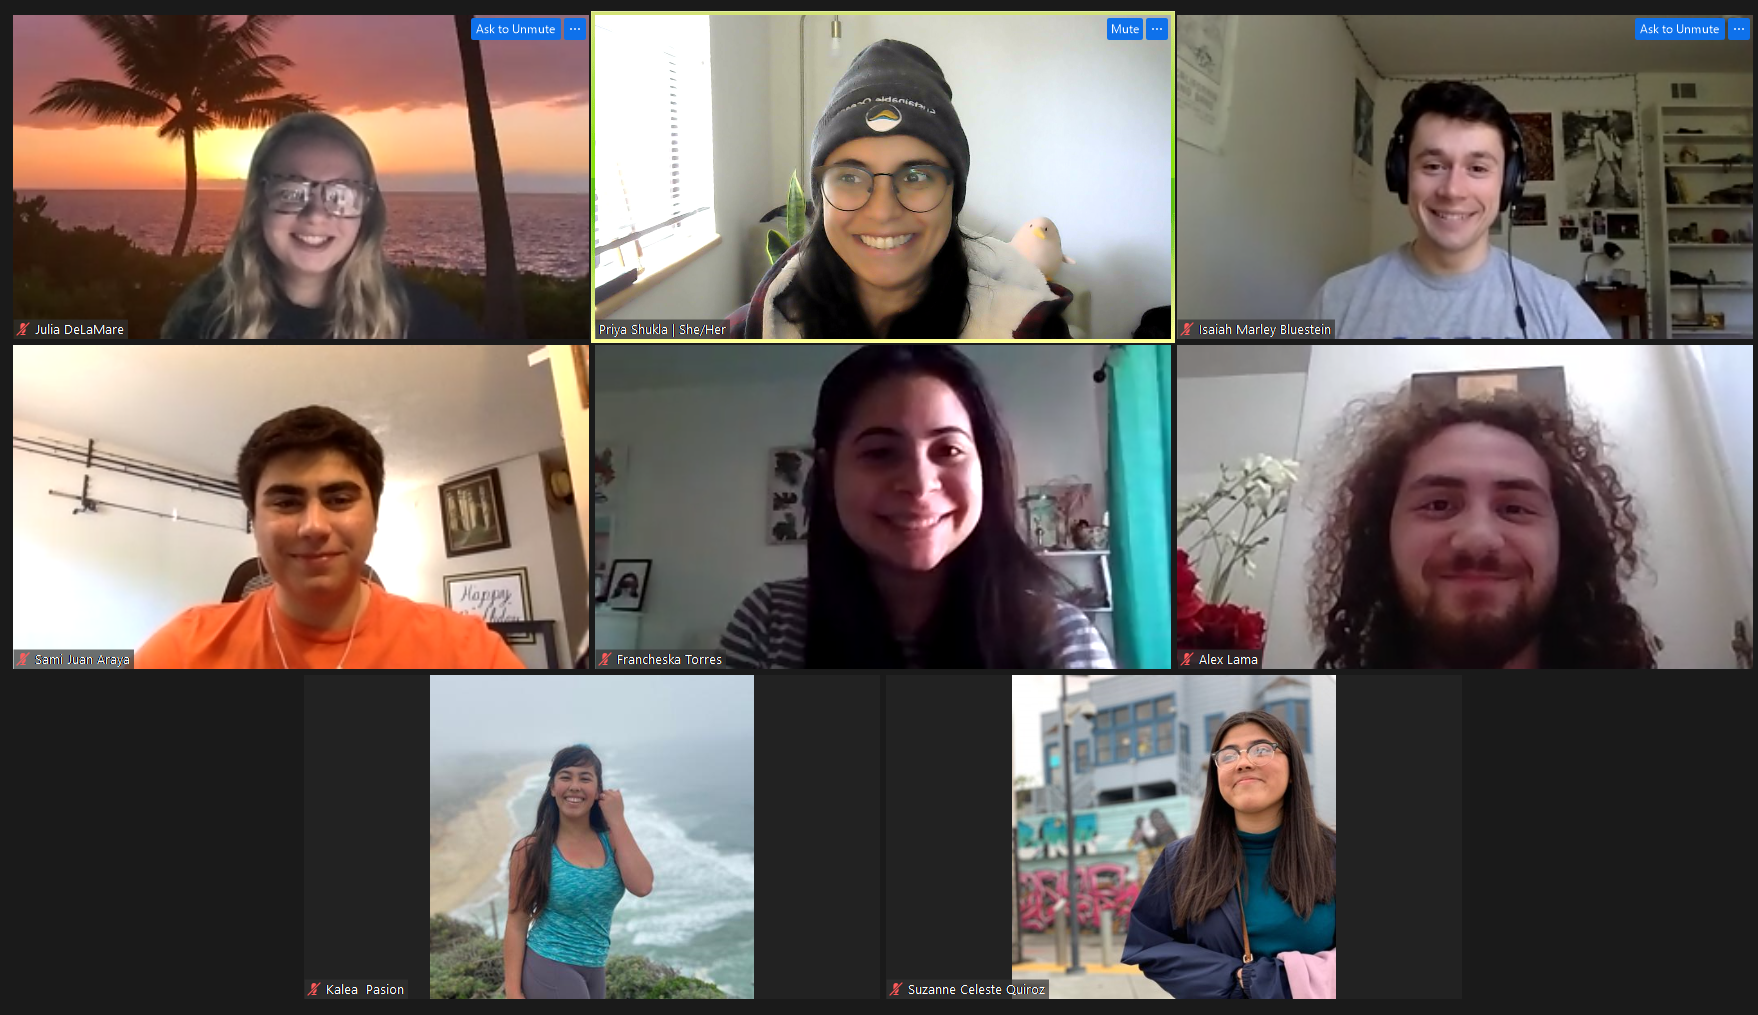 A screenshot showing 8 people participating in a zoom meeting